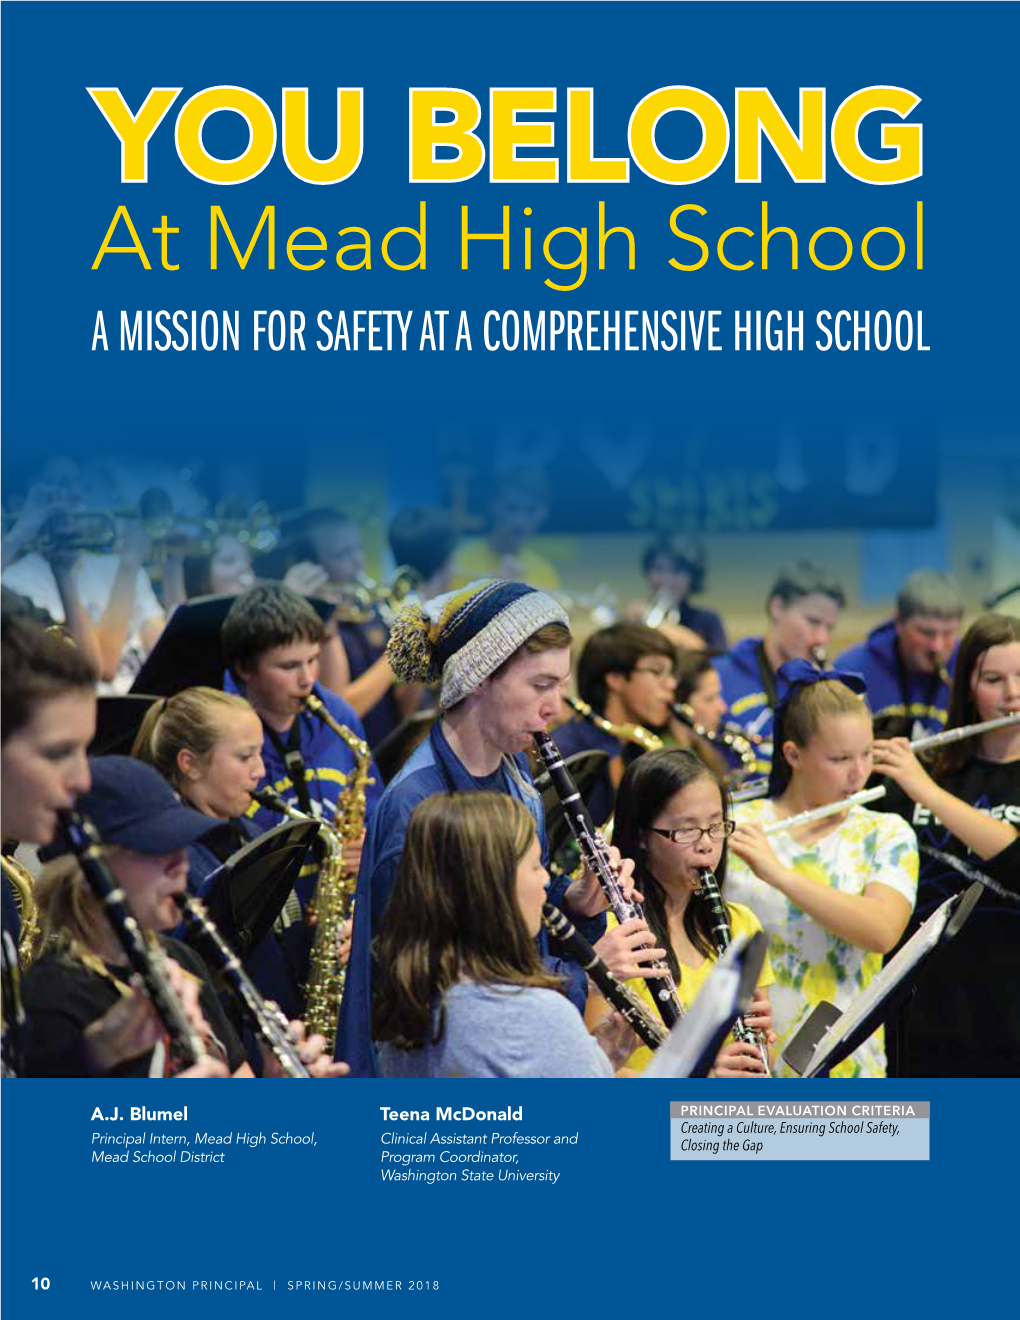 At Mead High School a MISSION for SAFETY at a COMPREHENSIVE HIGH SCHOOL